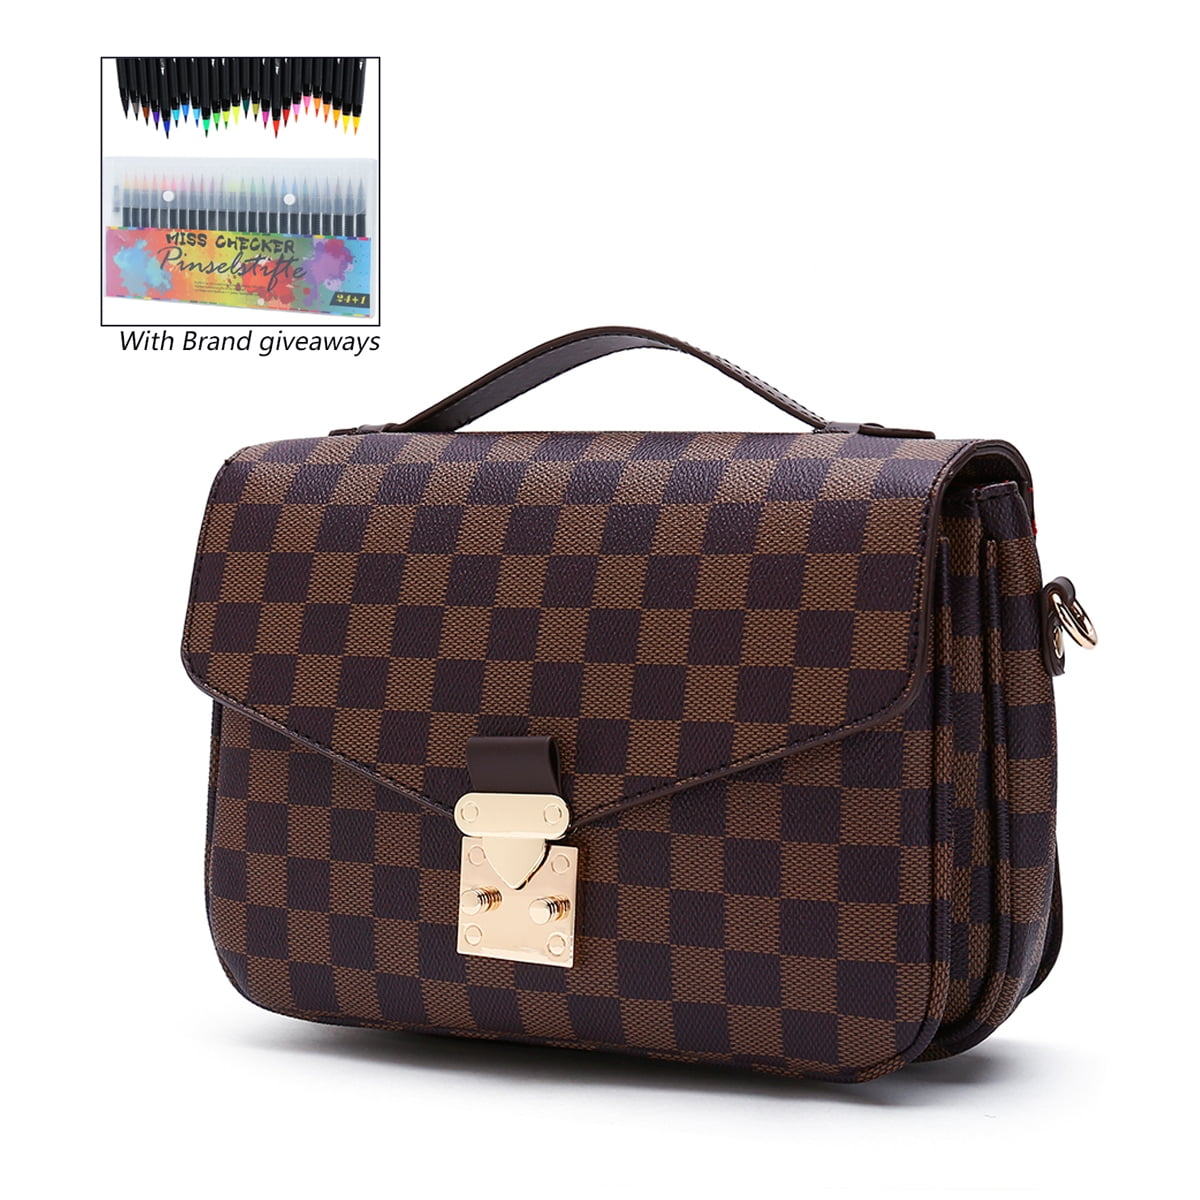 Louis Vuitton Onthego Giveaway